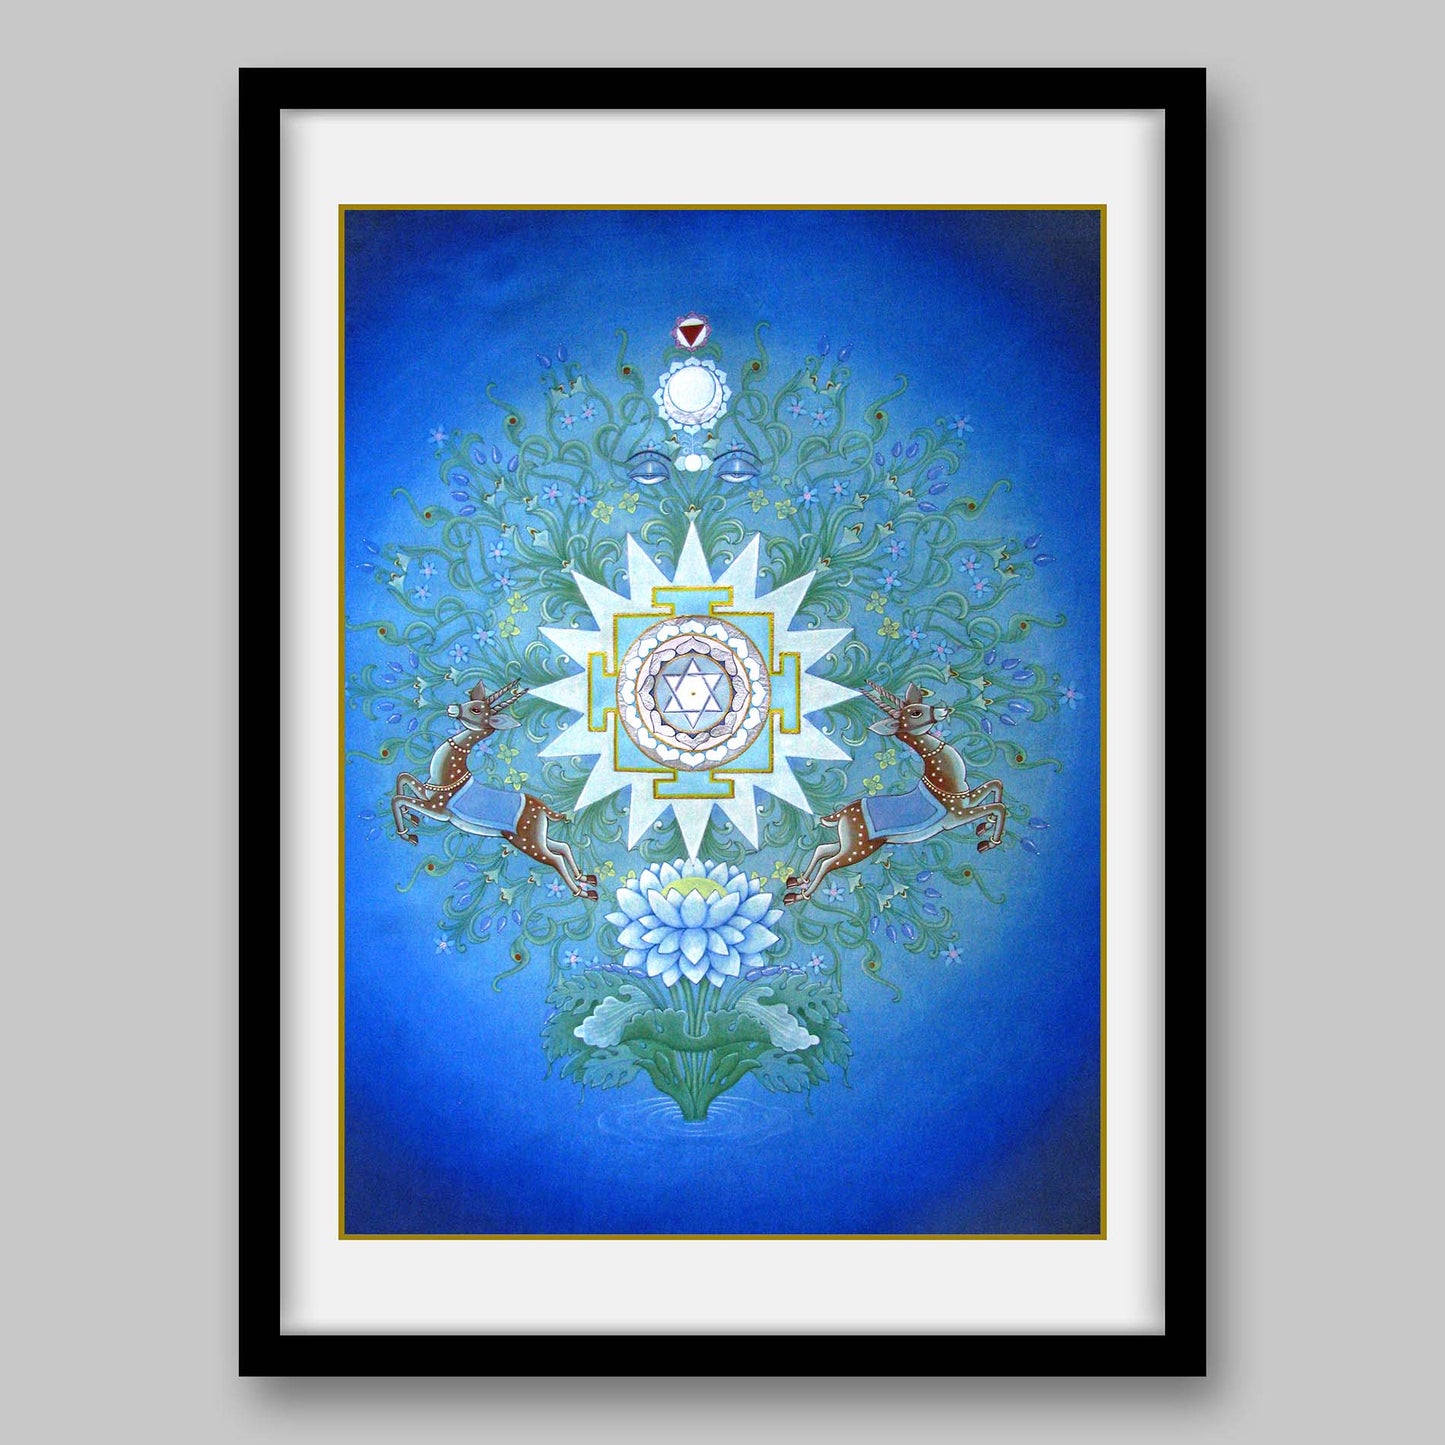 Moon Yantra - High Quality Print of Artwork by Pieter Weltevrede